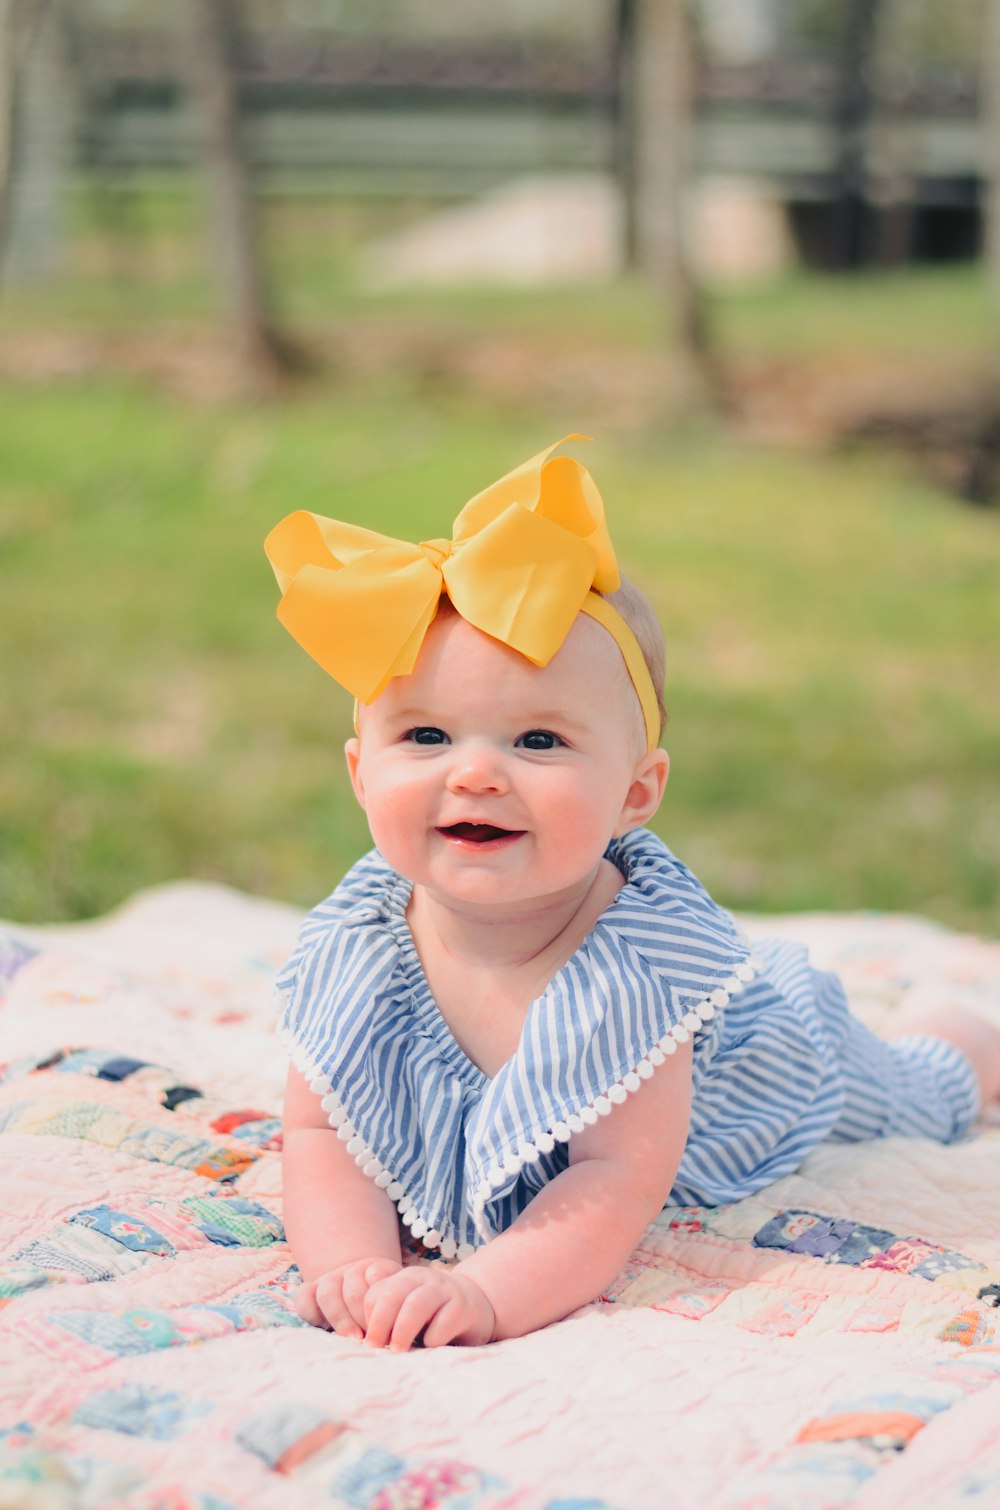 100+ Baby Girl Pictures | Download Free Images & Stock Photos on Unsplash